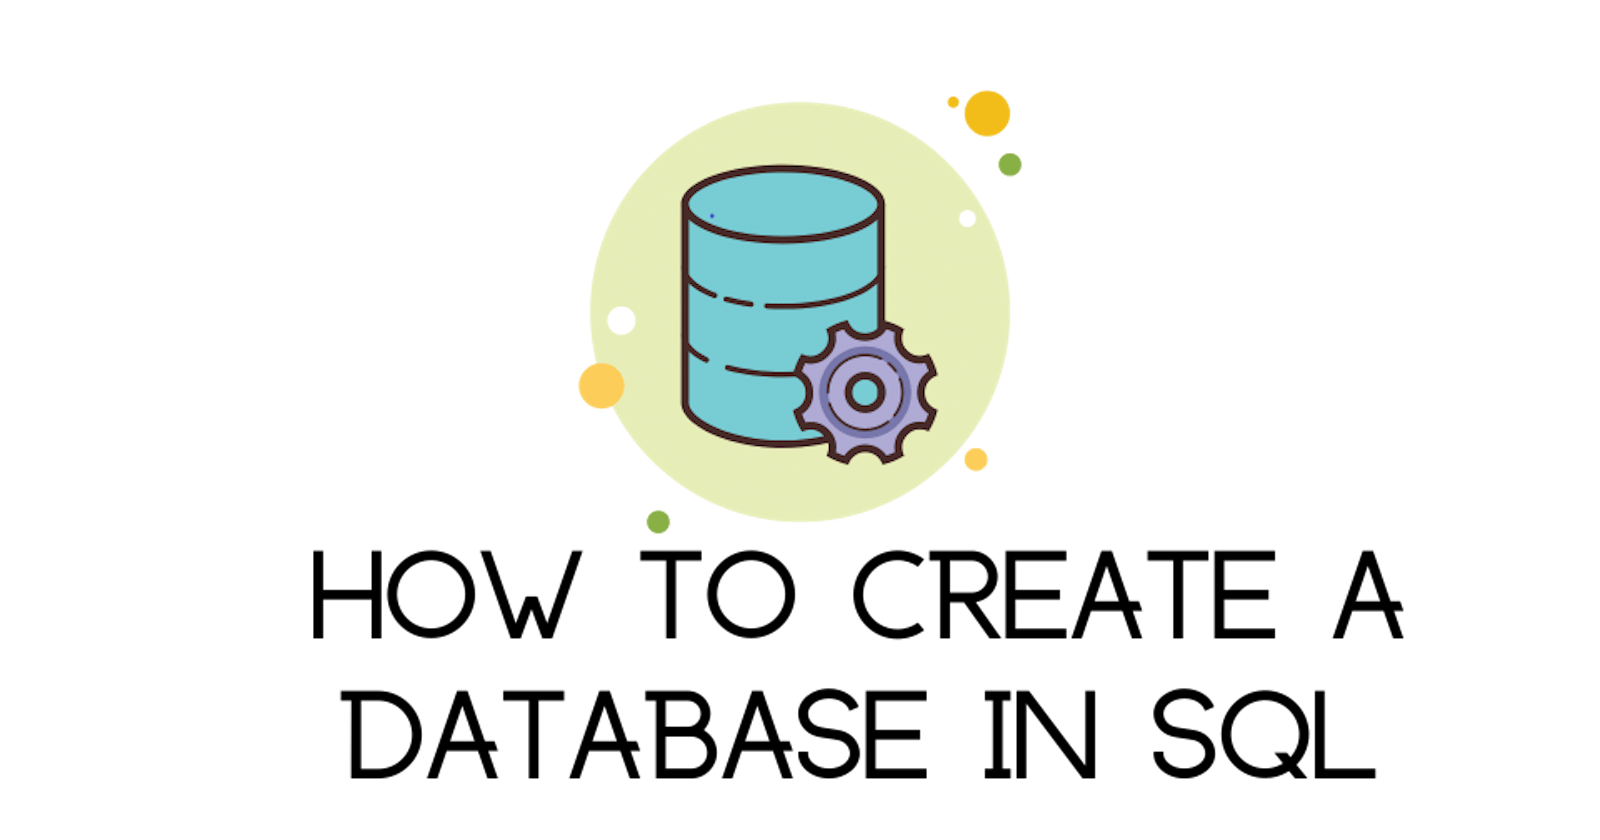 Create A Database And Table In SQL